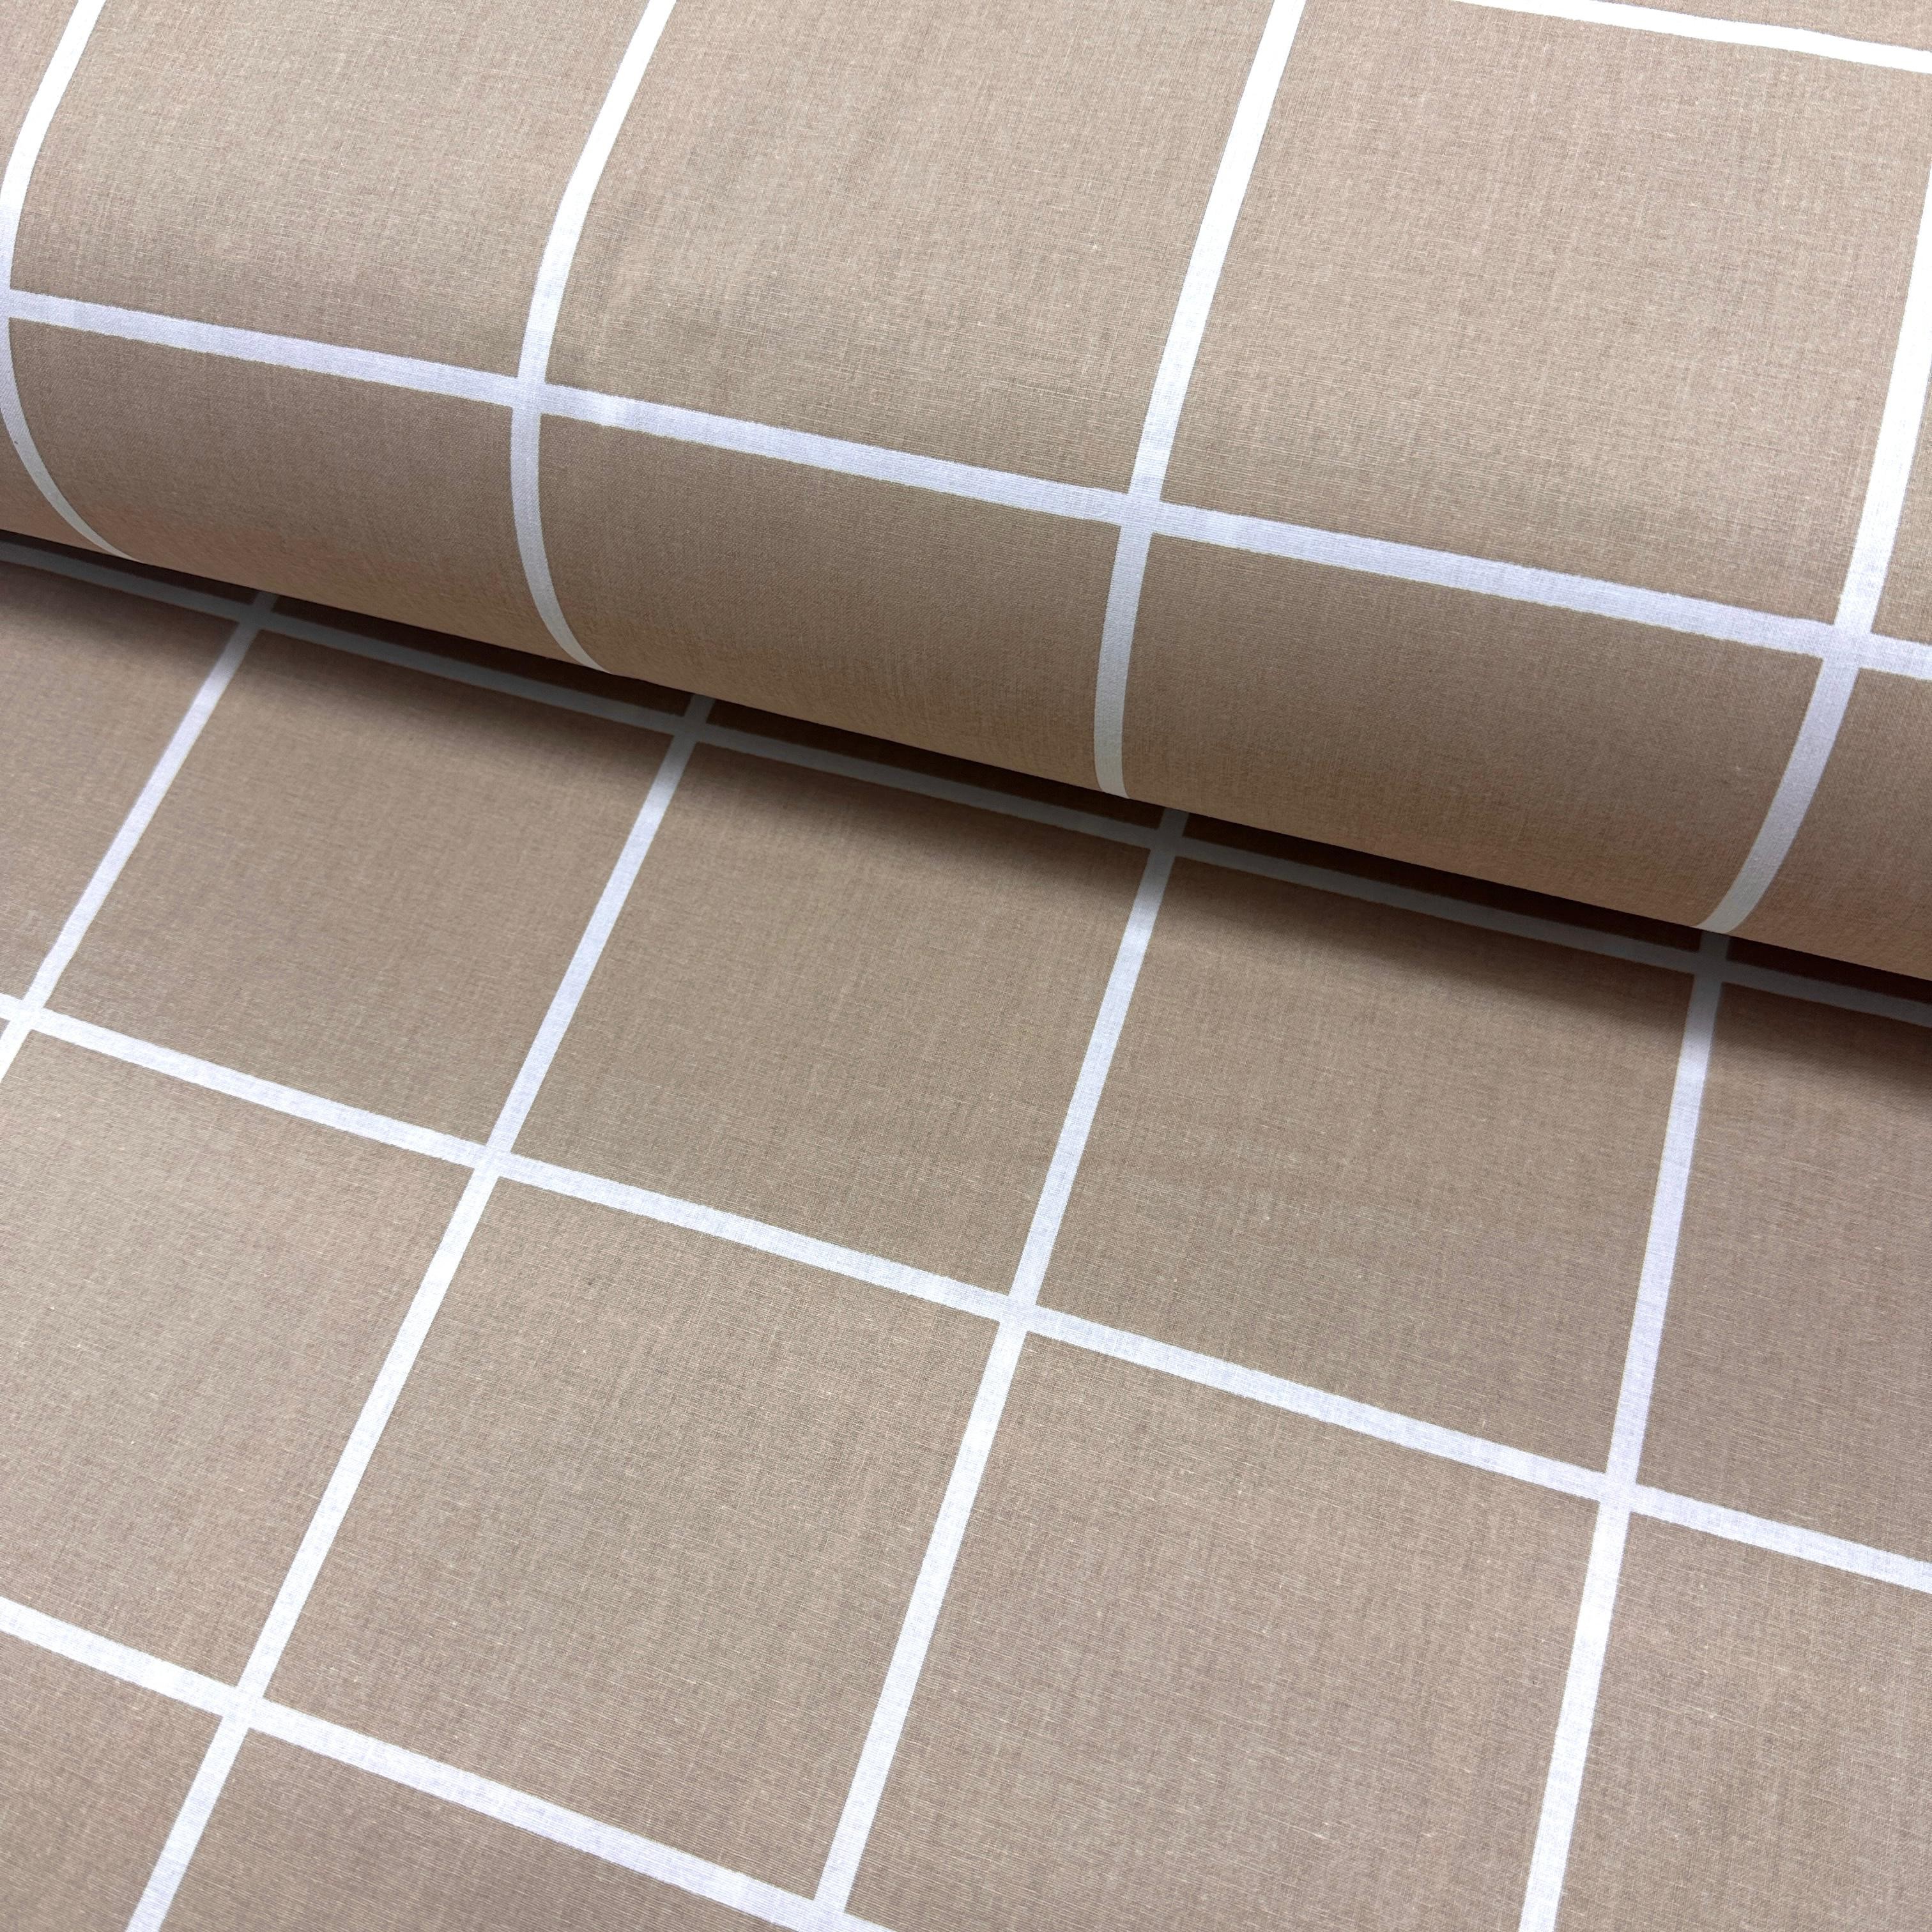 White Squares On Colored Poplin Fabric